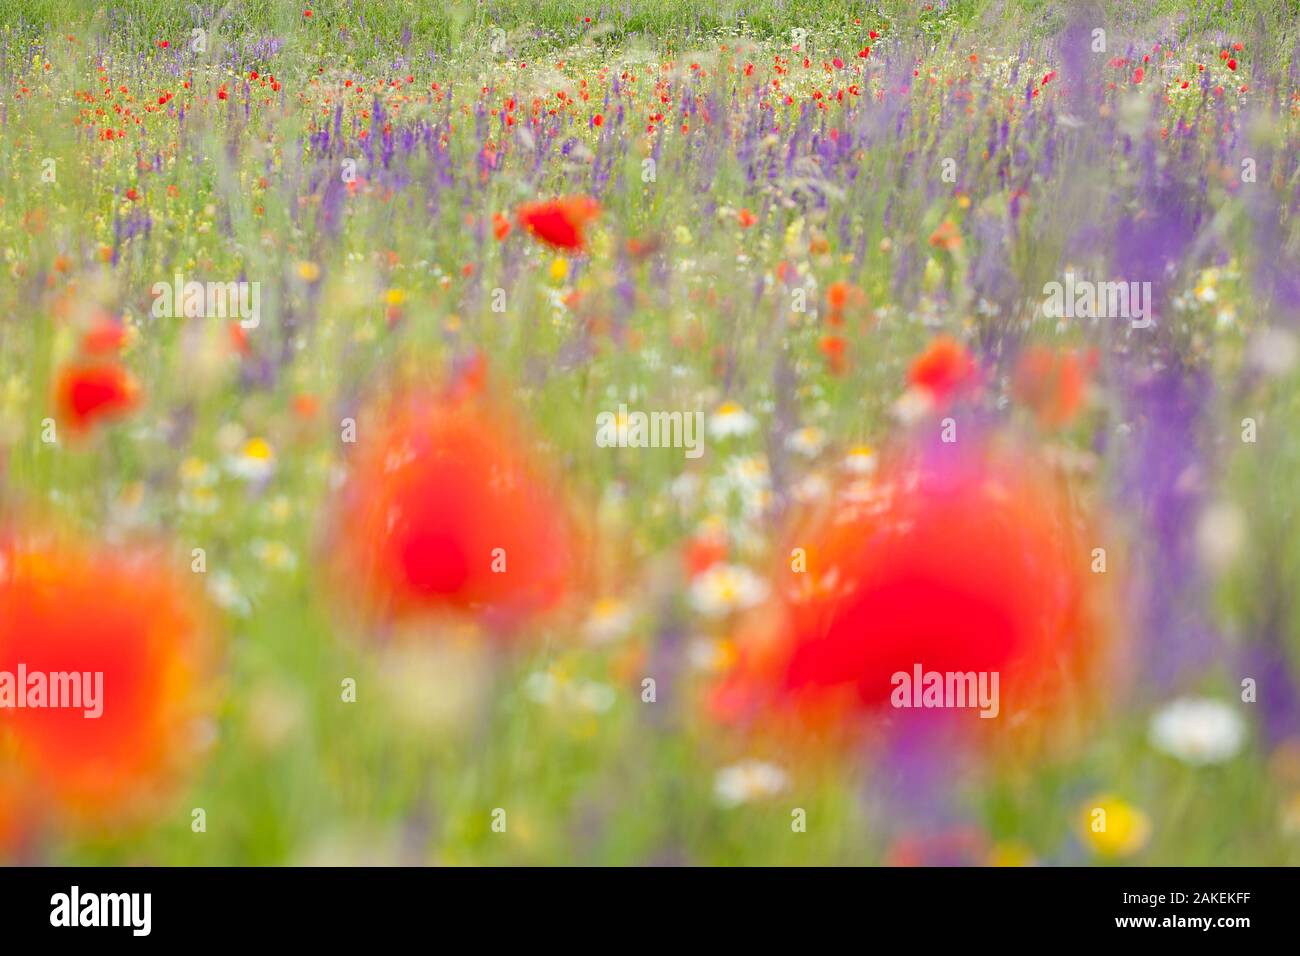 Red poppies, cornflowers, daisies and other ruderal species colonize abandoned cultivated fields. Gran Sasso National Park, Central Apennines, Abruzzo, Italy, June. Stock Photo